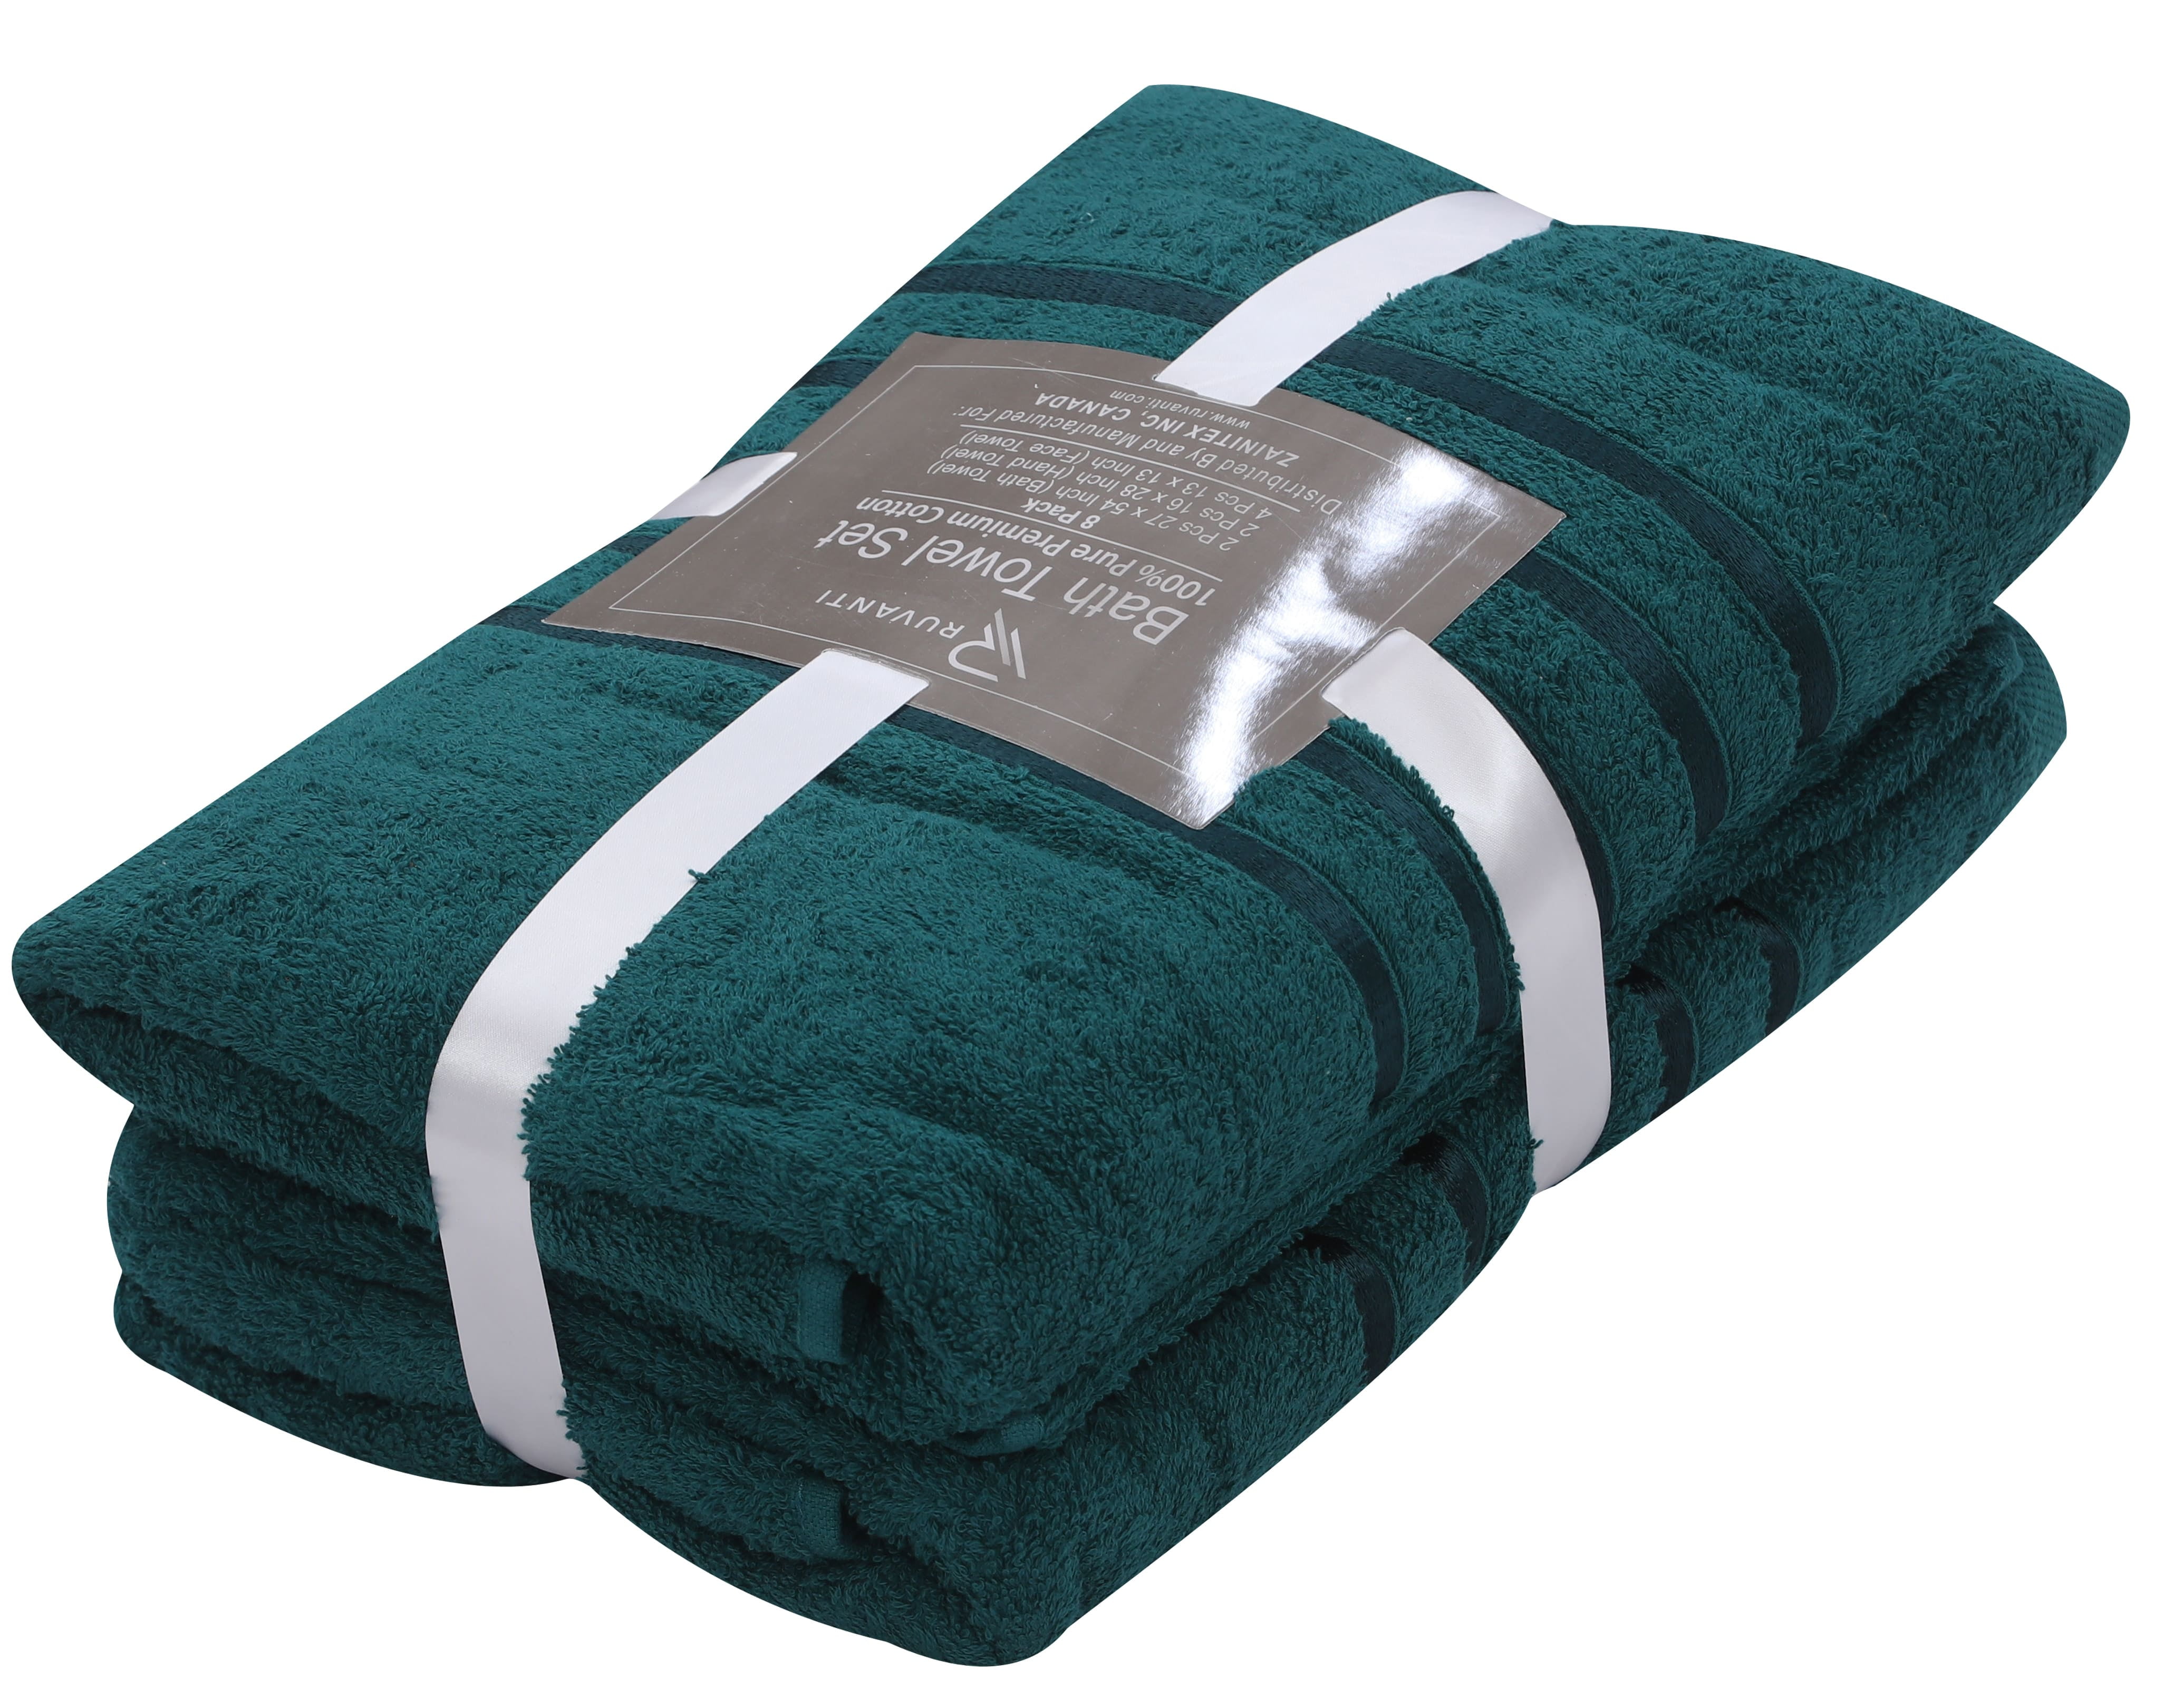 Ruvanti Bath Towels 4 Pcs (27x54 inch, Cream) 100% Cotton Extra Large  Bathroom Towel Set. Super Soft, Highly Absorbent, Quick Dry, Lightweight &  Washable Luxury Towels for Bathroom, Home, Spa, Hotel. 